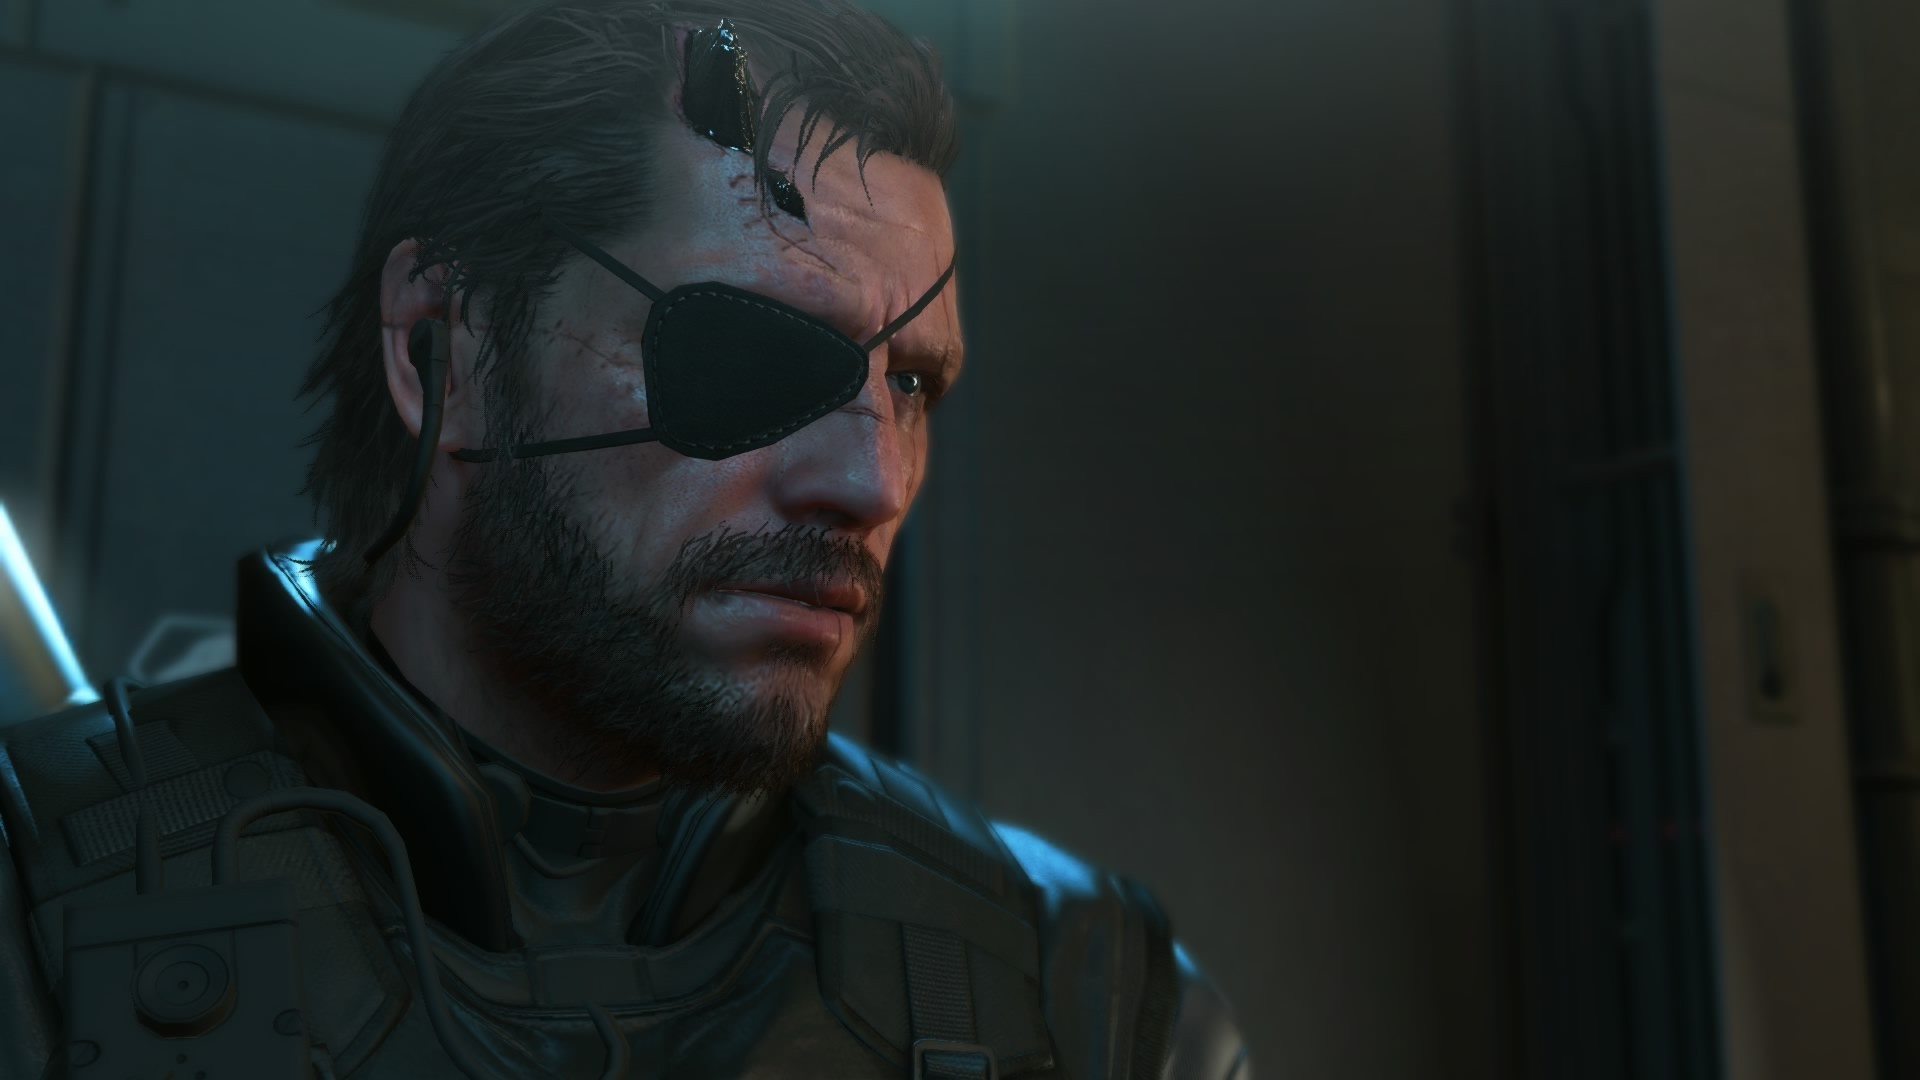 General 1920x1080 Big Boss Metal Gear Solid Metal Gear Solid V: The Phantom Pain video games video game men video game characters eyepatches scars